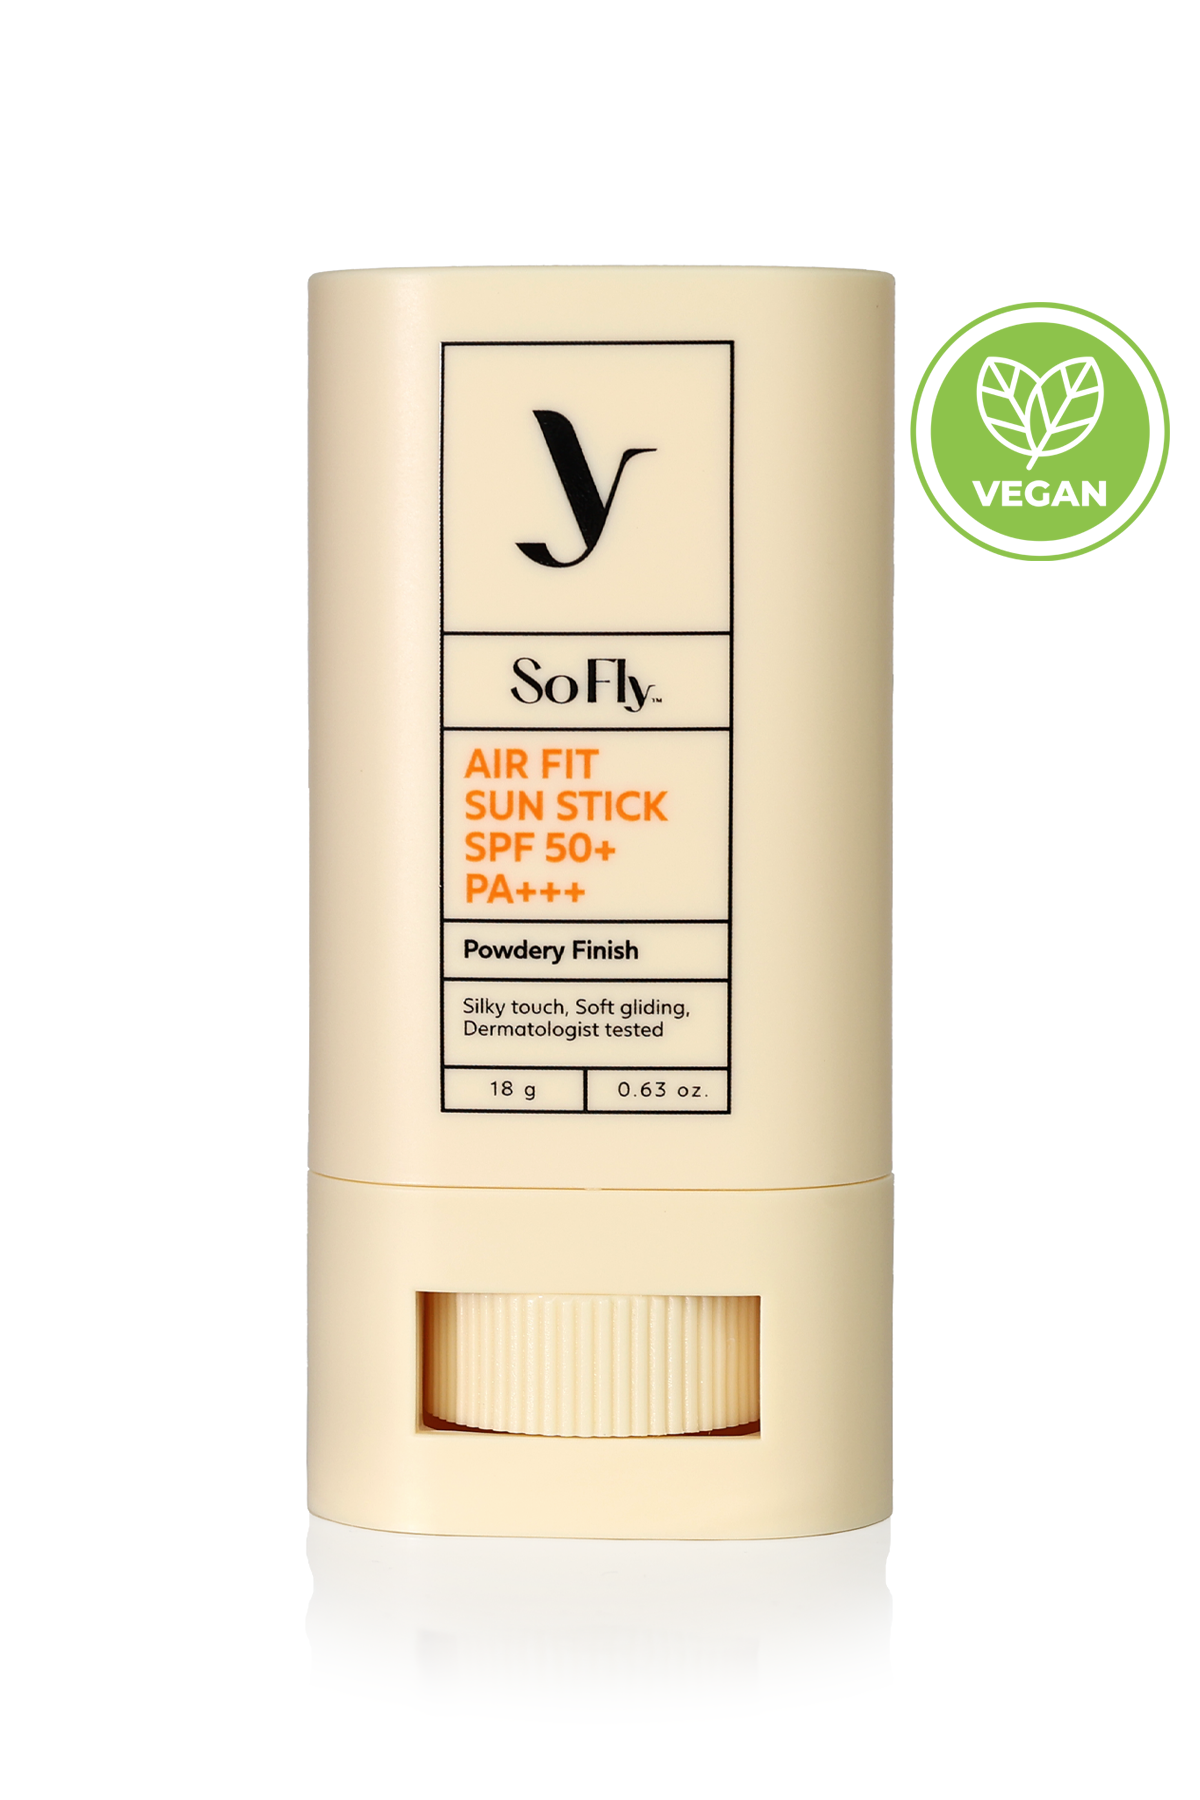 So Fly Air Fit Sun Stick SPF50+ PA+++ 18 g